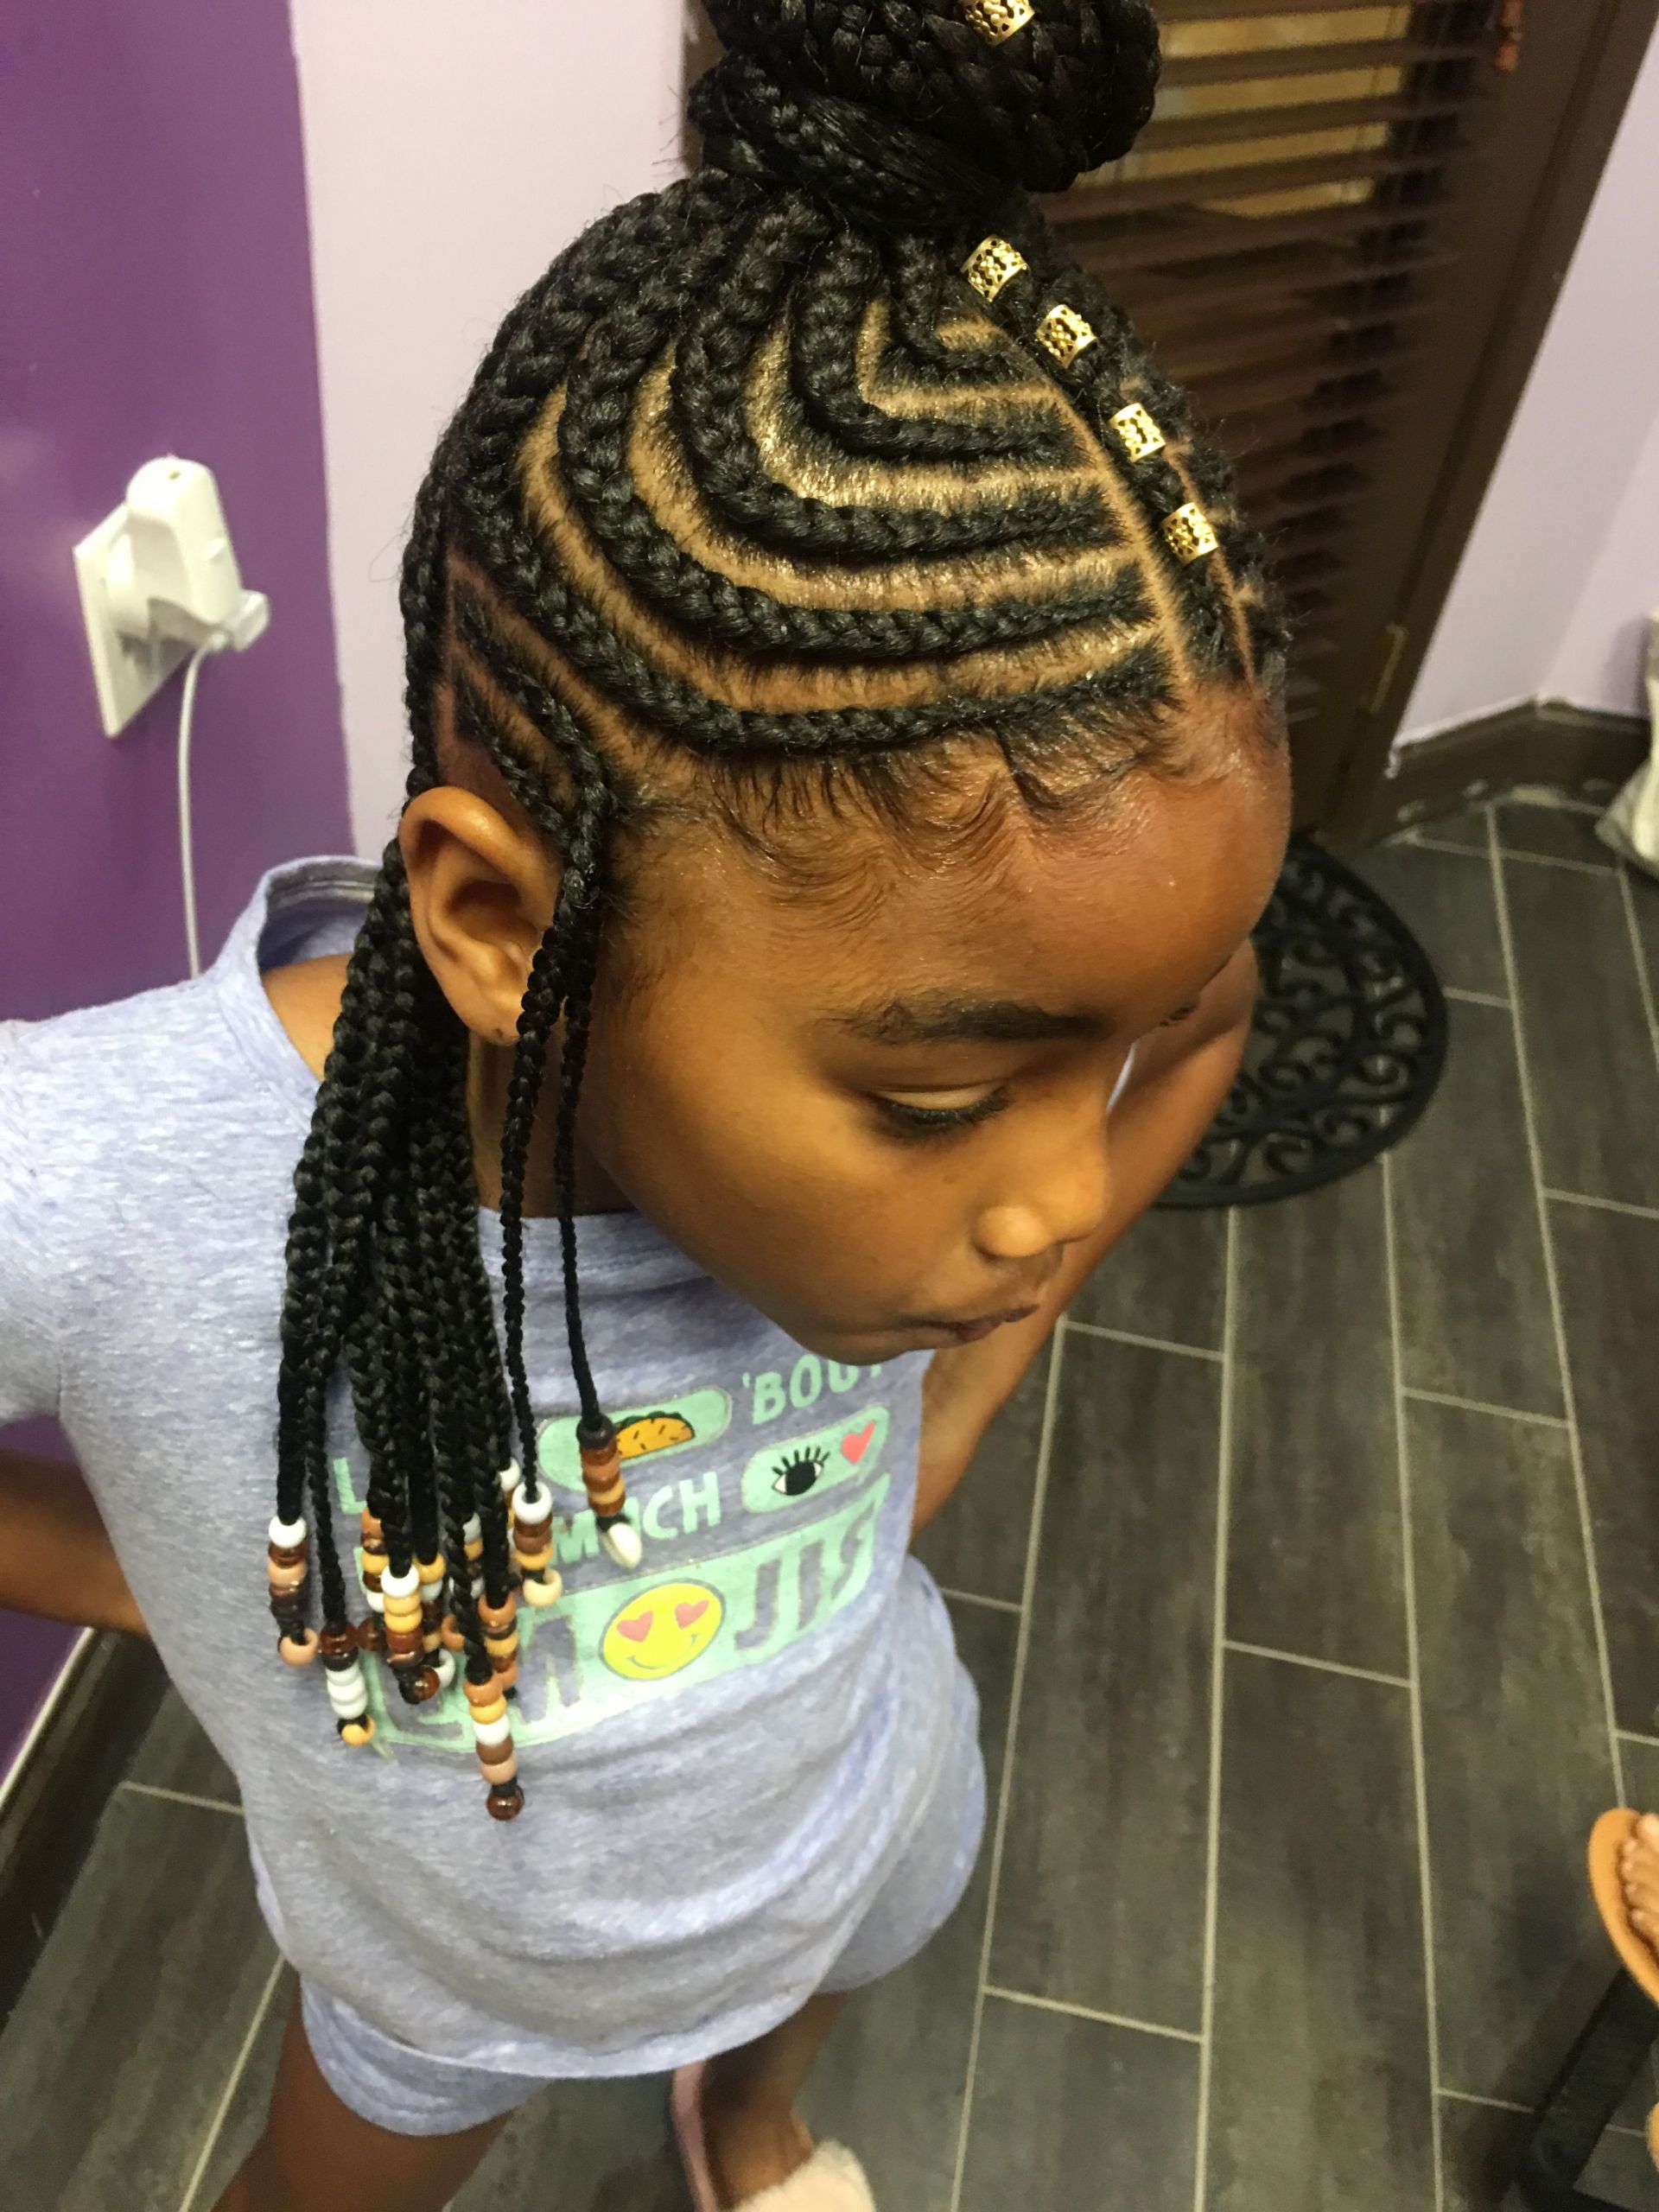 Girls Braided Hairstyles
 She Used Flat Twists To Create Fabulous Summer Curls